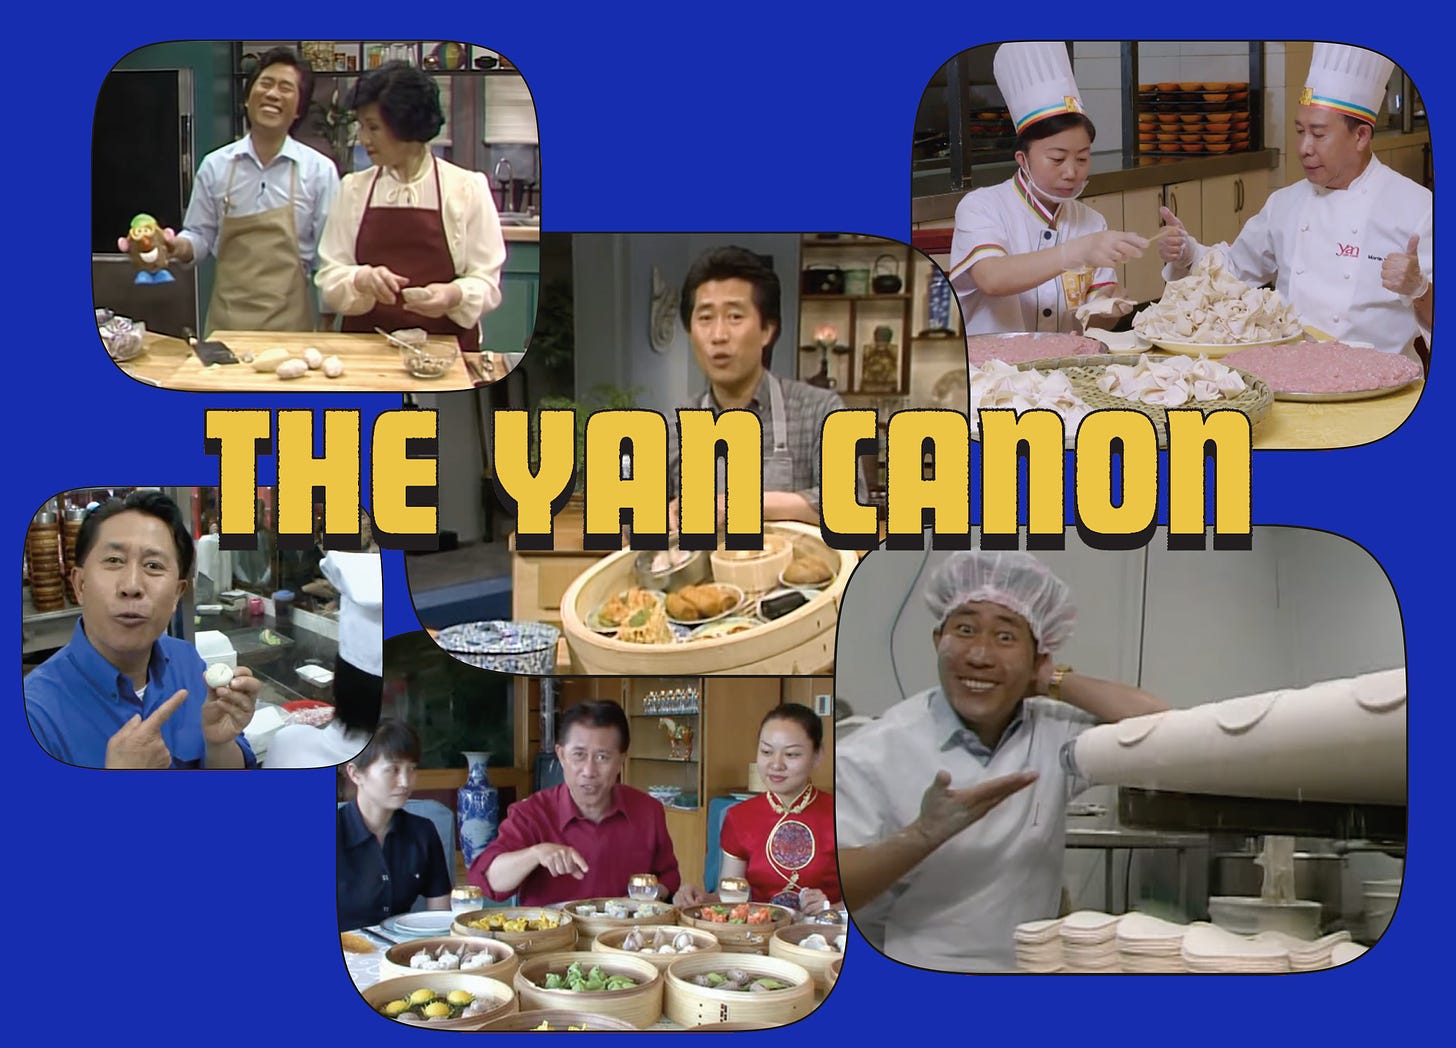 A selection of screenshots from episodes of Martin Yan's television shows featuring dumplings